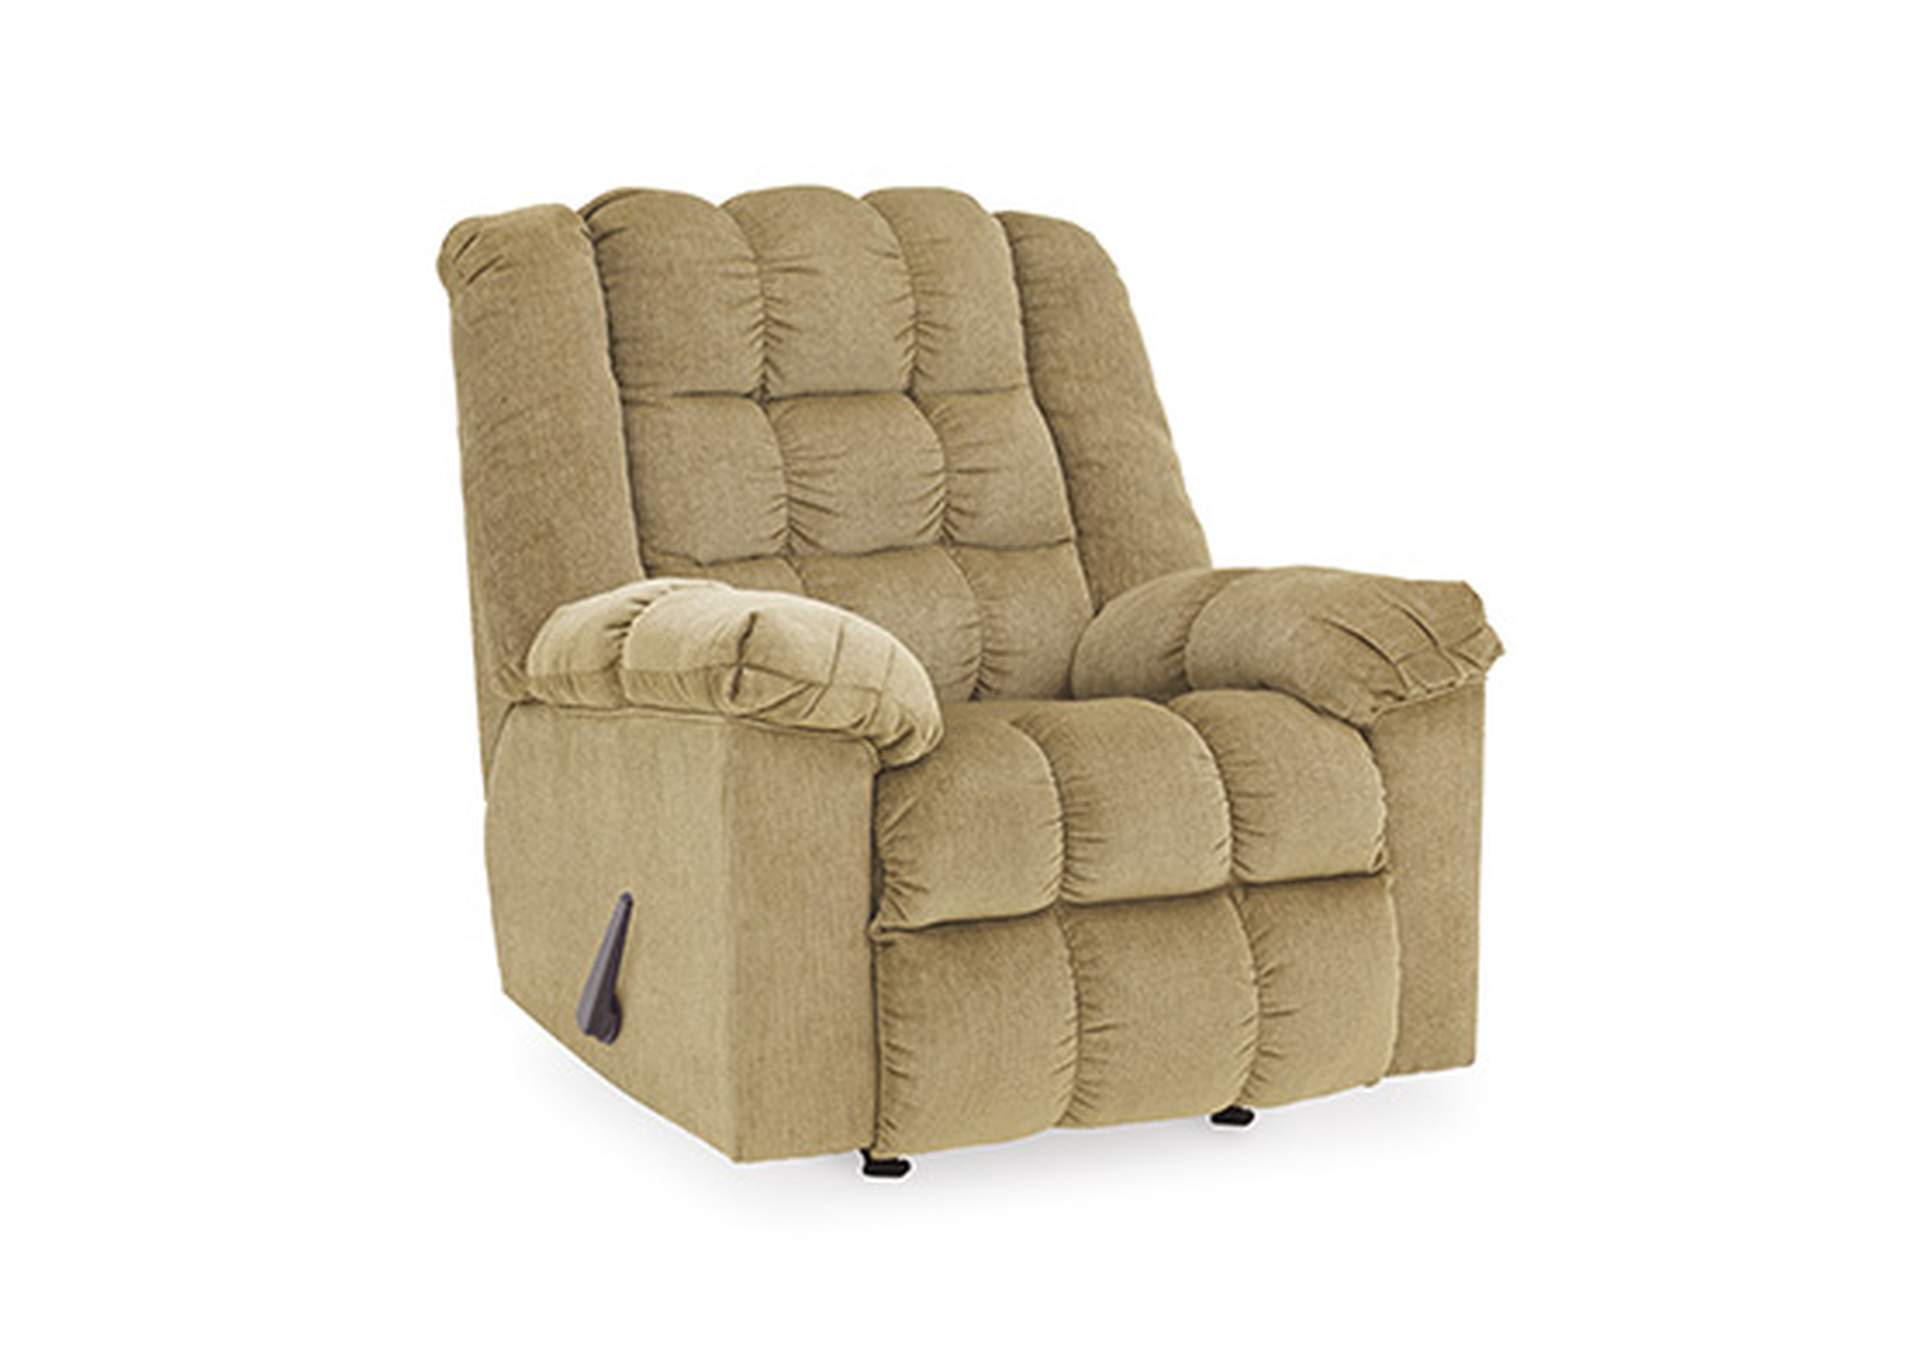 Ludden Recliner,Signature Design By Ashley